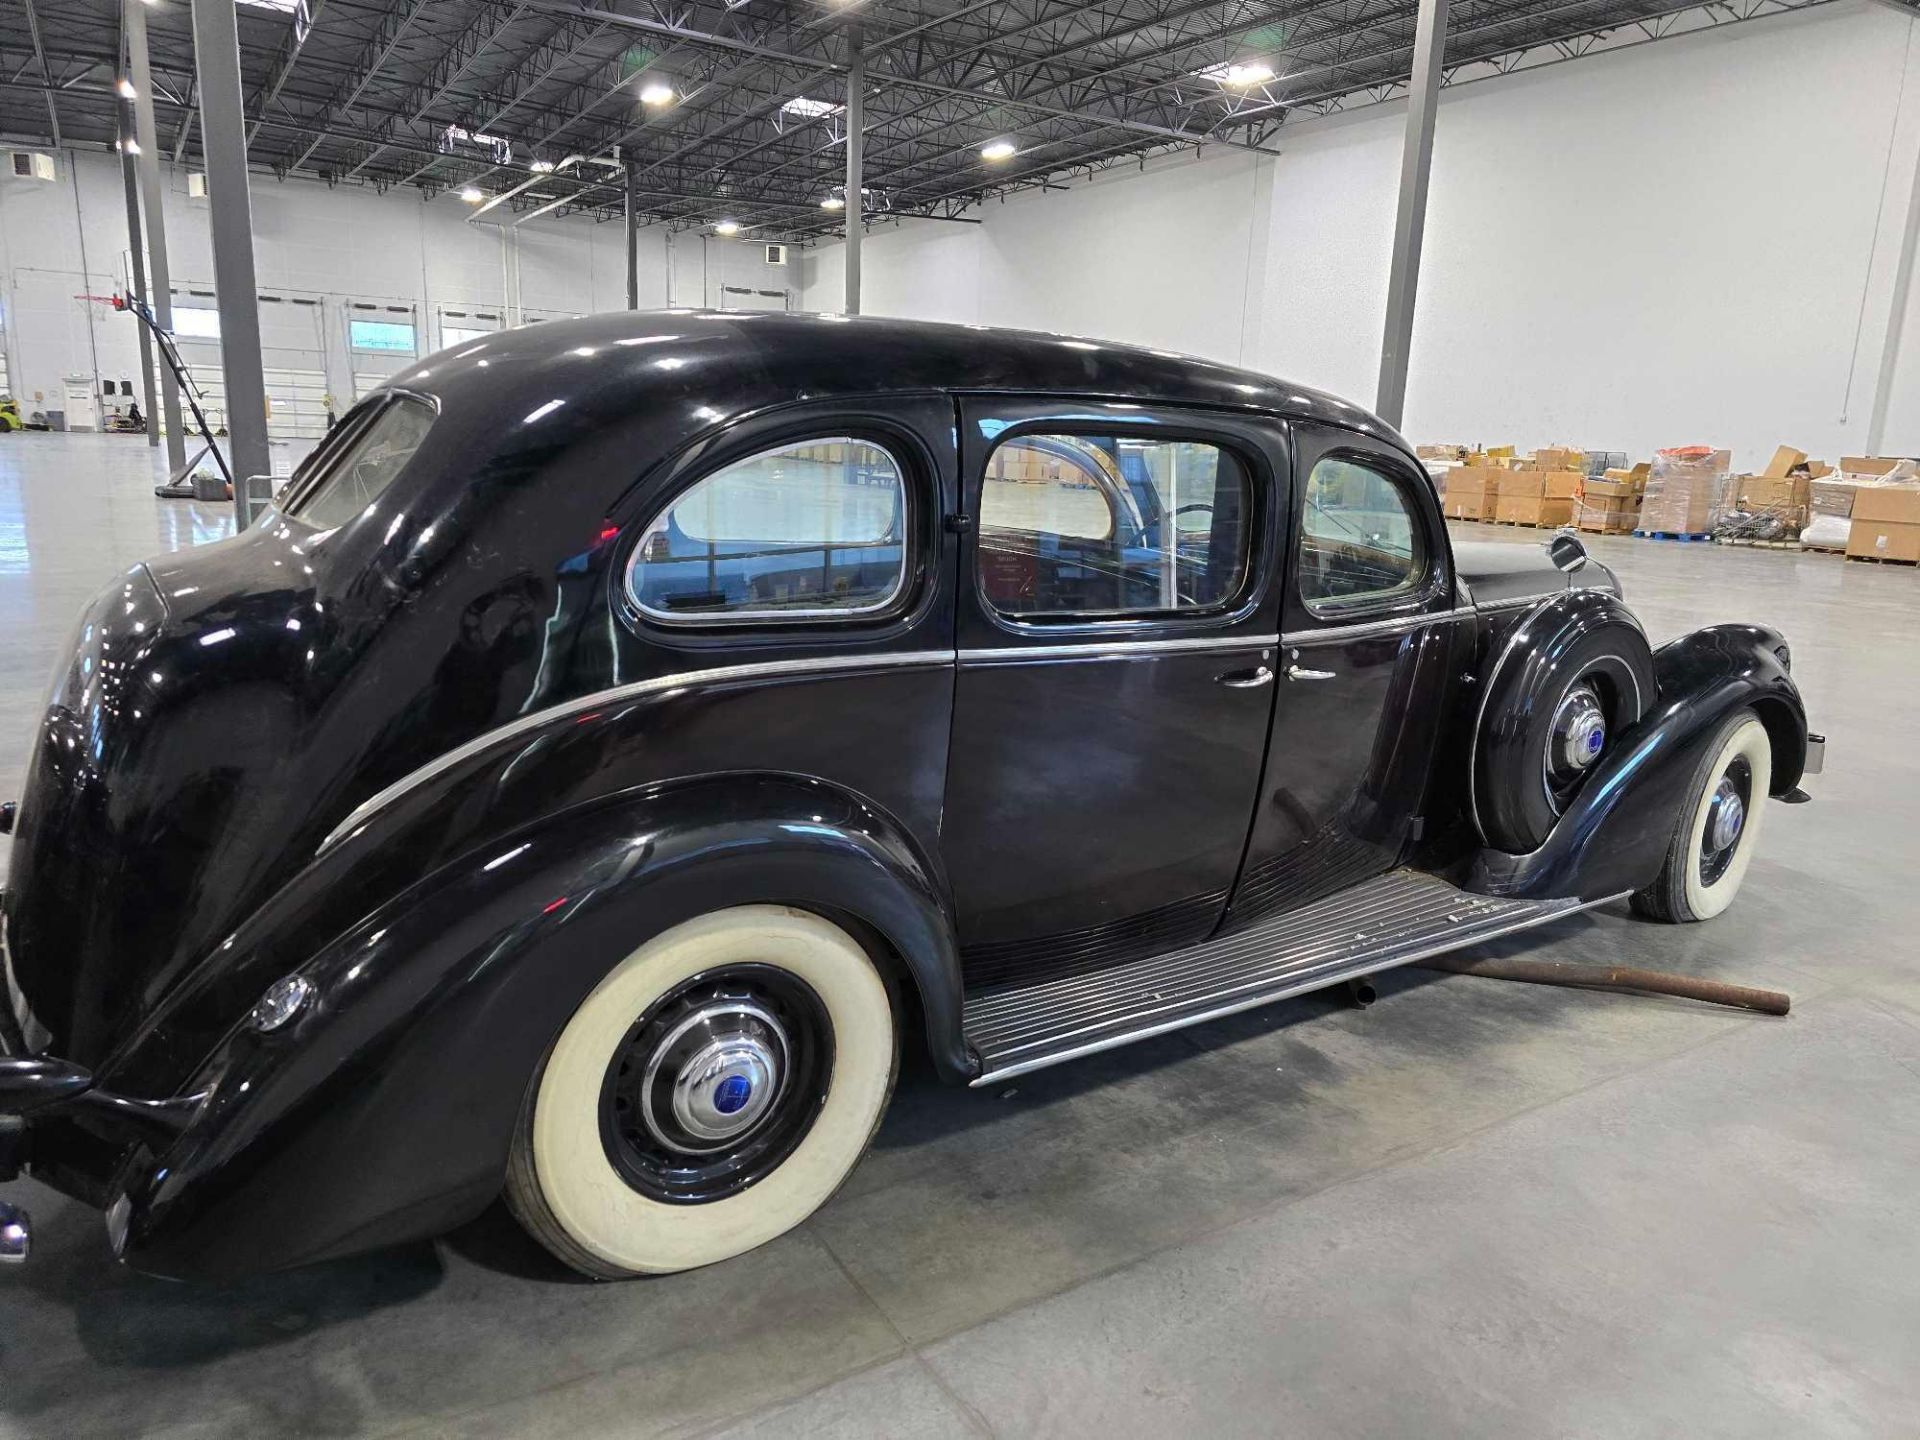 1938 Lincoln Model K v12 (last ran 4 years ago, we believe it needs new gas and a battery)  VIN #K91 - Image 20 of 37